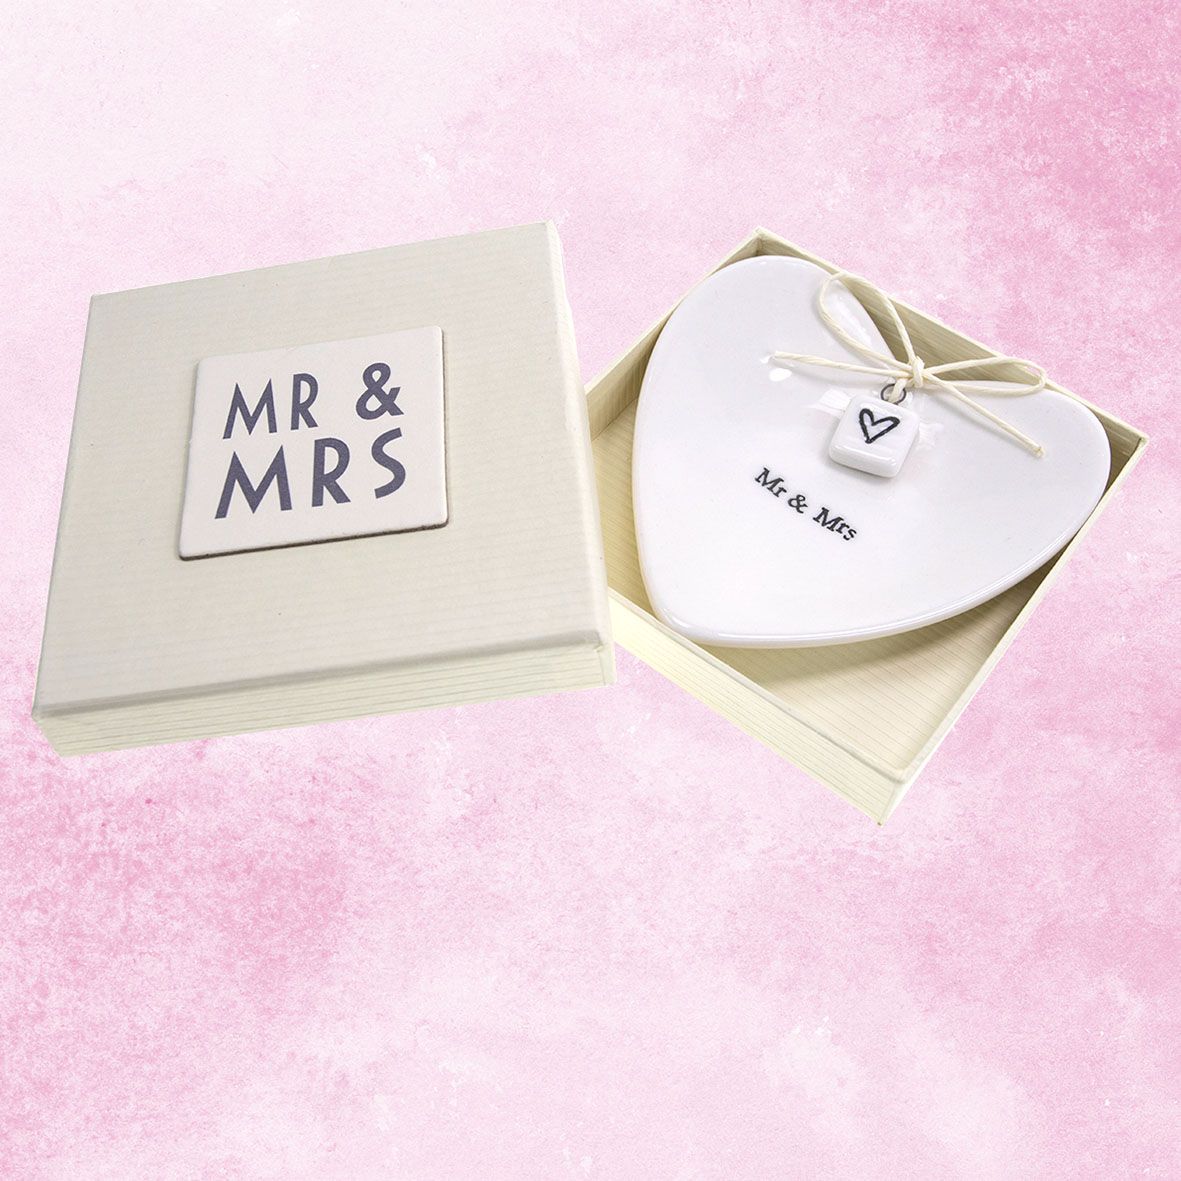 'Mr and Mrs' Gifts category image